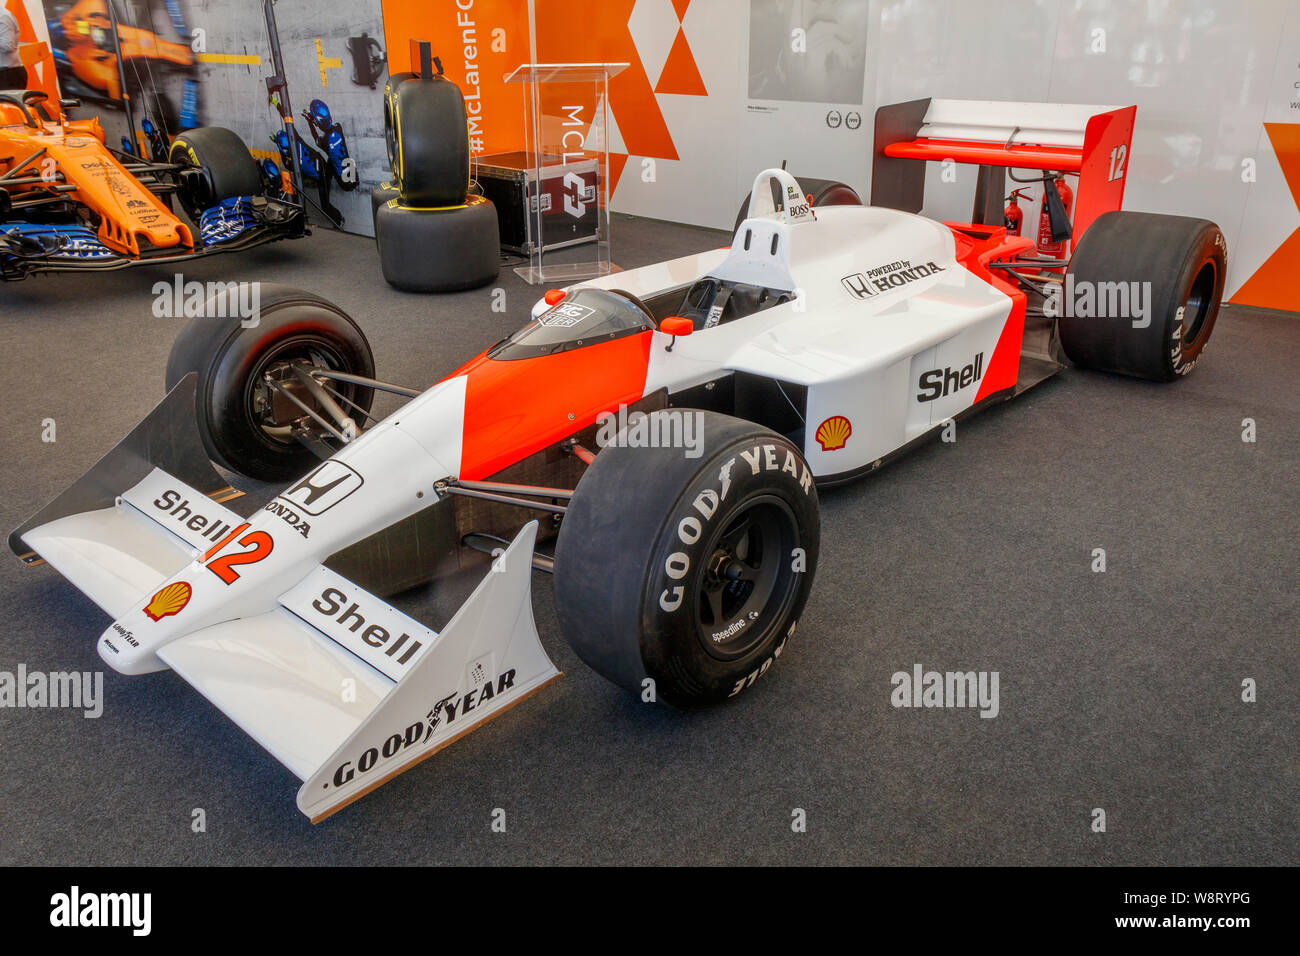 1988 McLaren-Honda MP4/4 Formula 1 single-seater in the paddock garage at the 2019 Goodwood Festival of Speed, Sussex, UK. Stock Photo